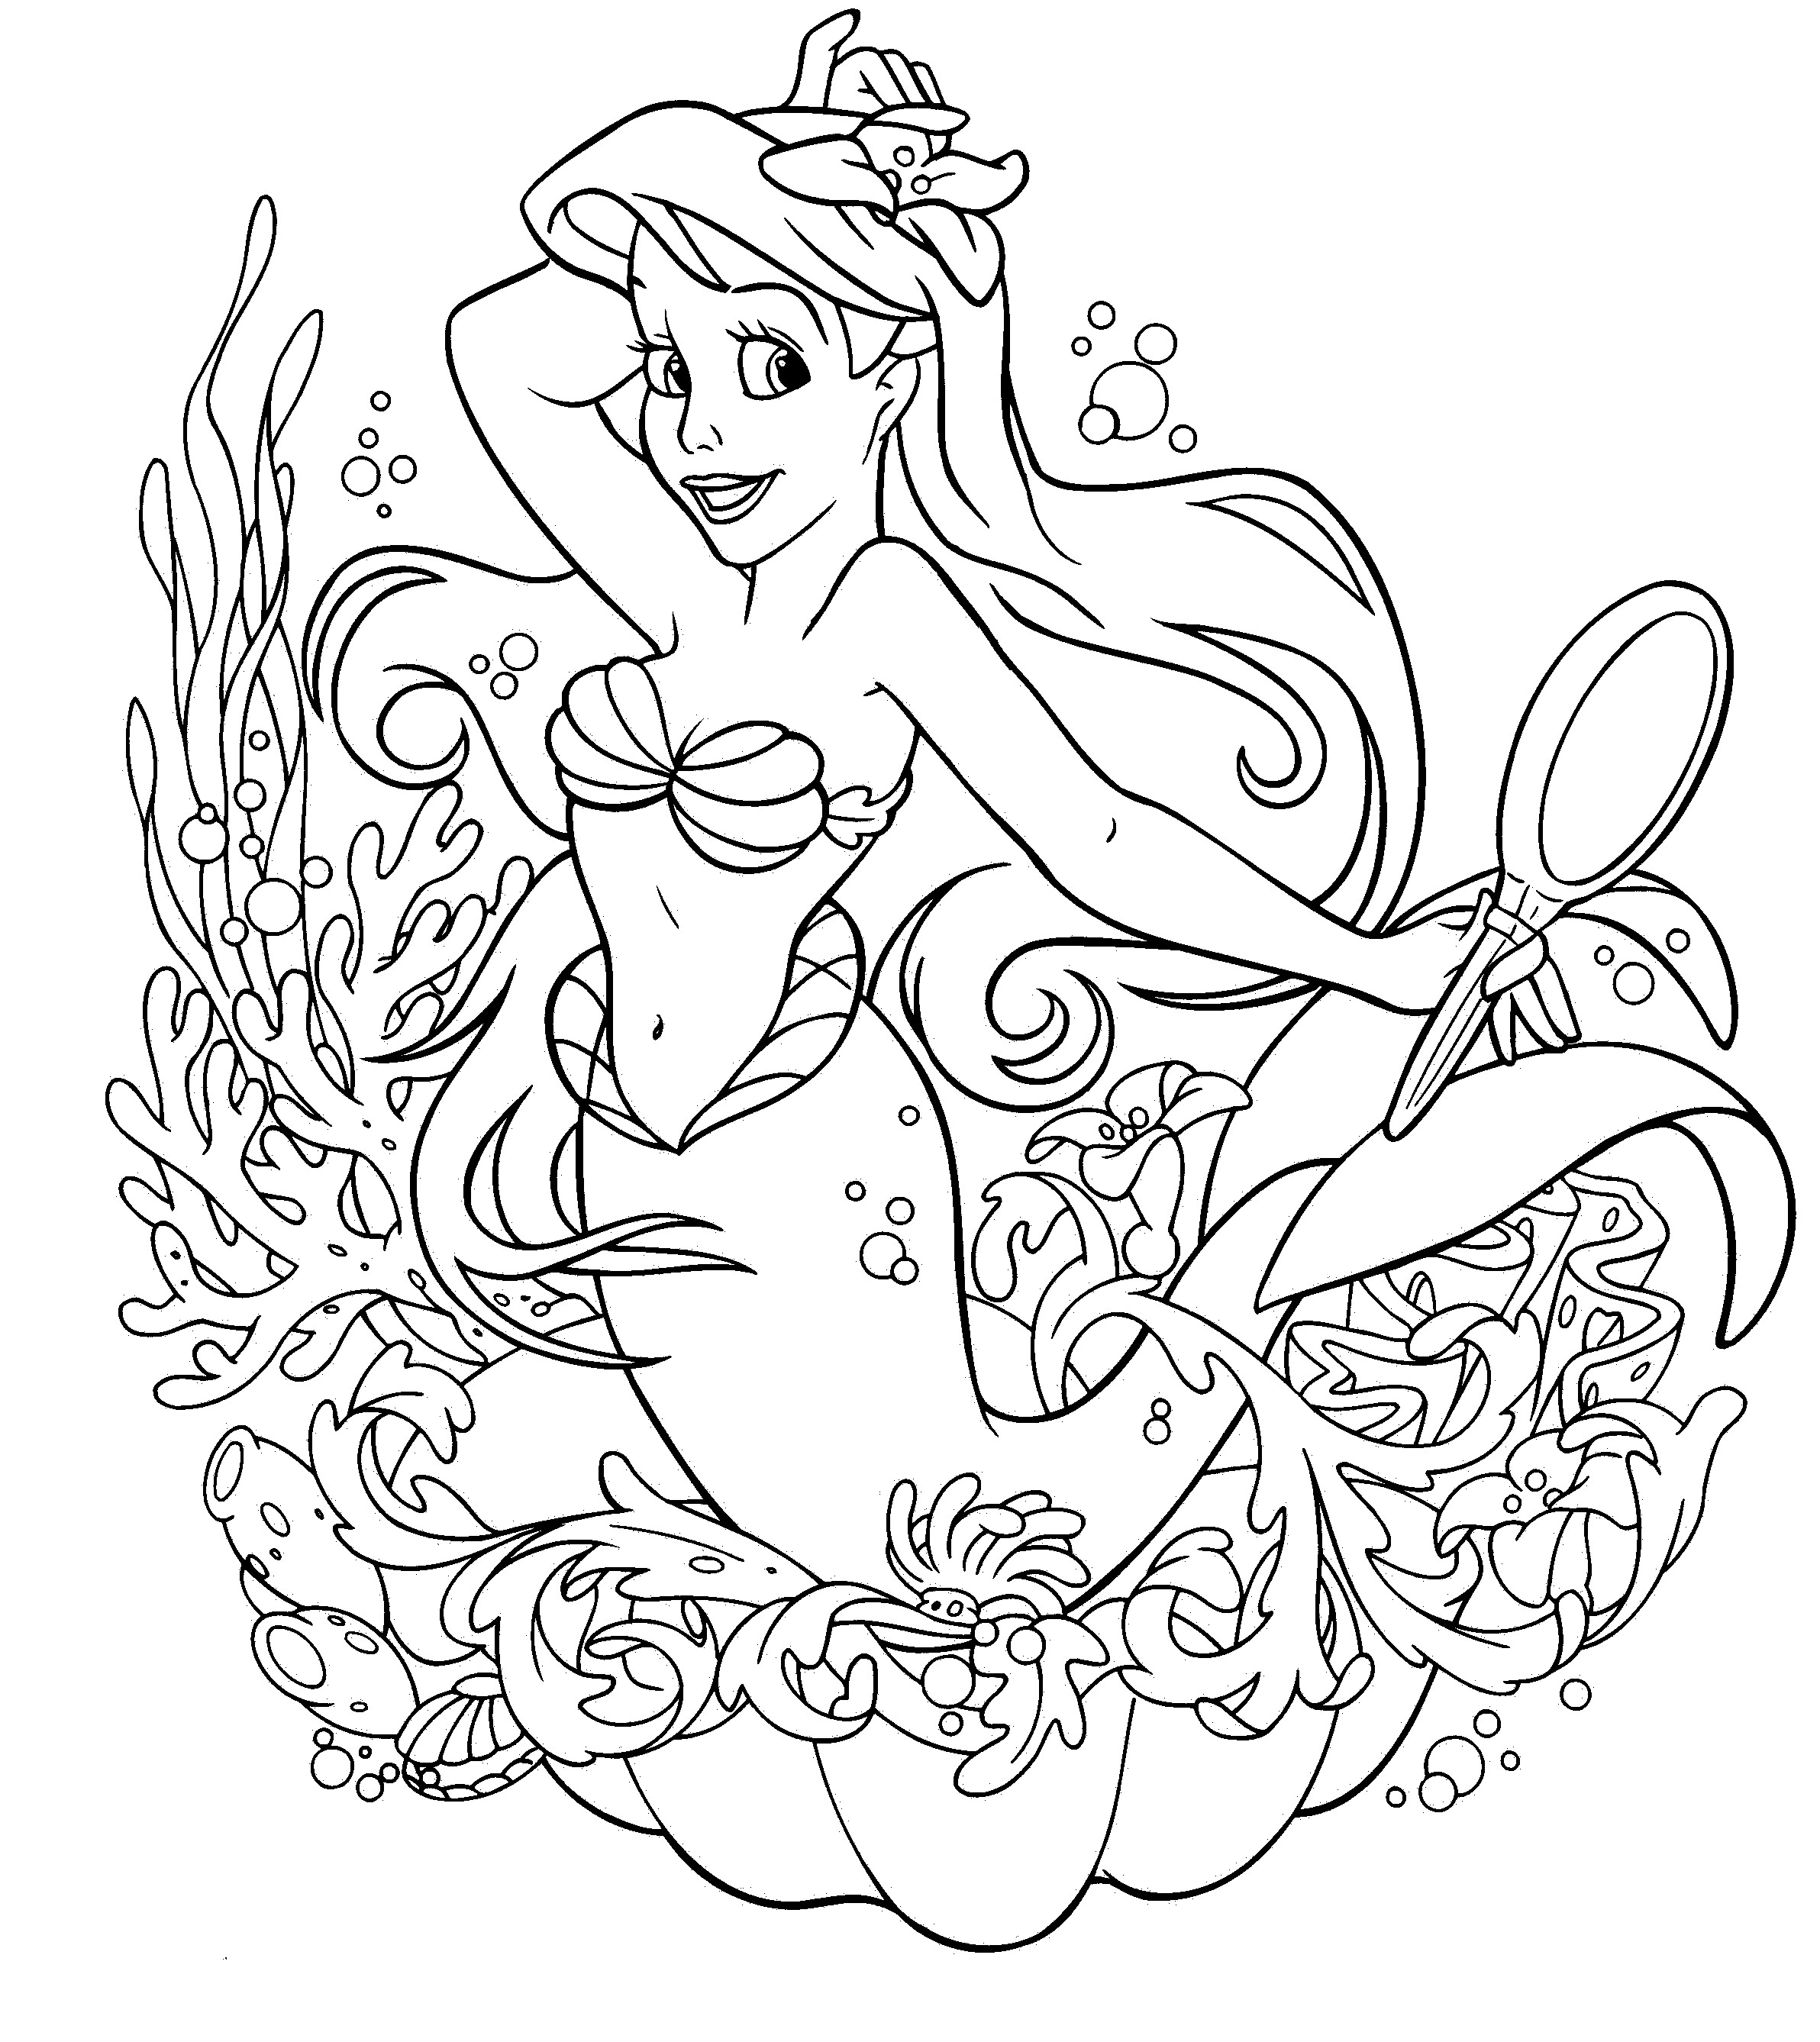 Coloring Pages For Girls Online
 Coloring Pages for Girls Dr Odd